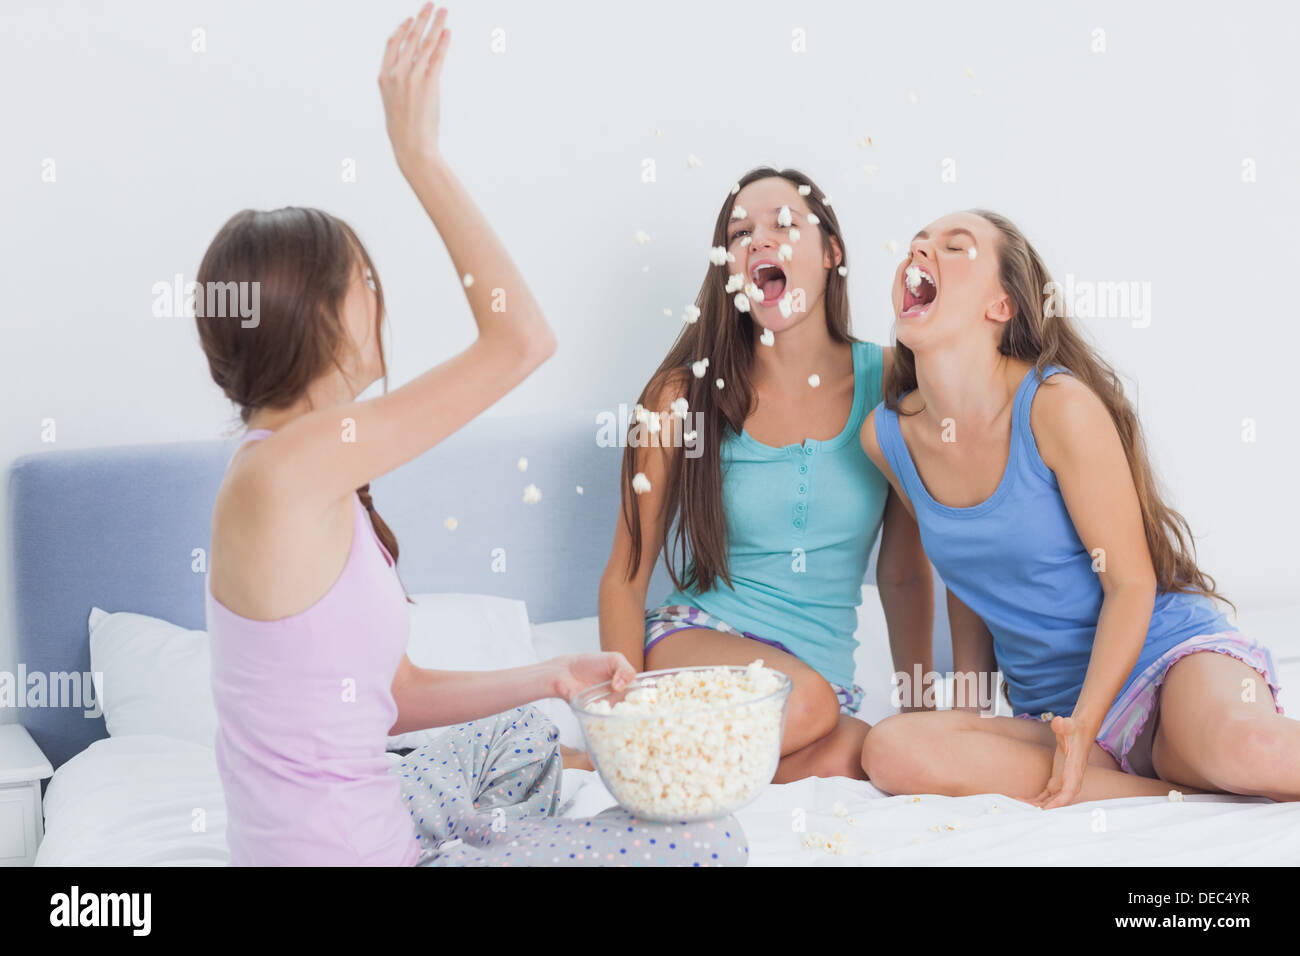 Friends messing around at slumber party Stock Photo